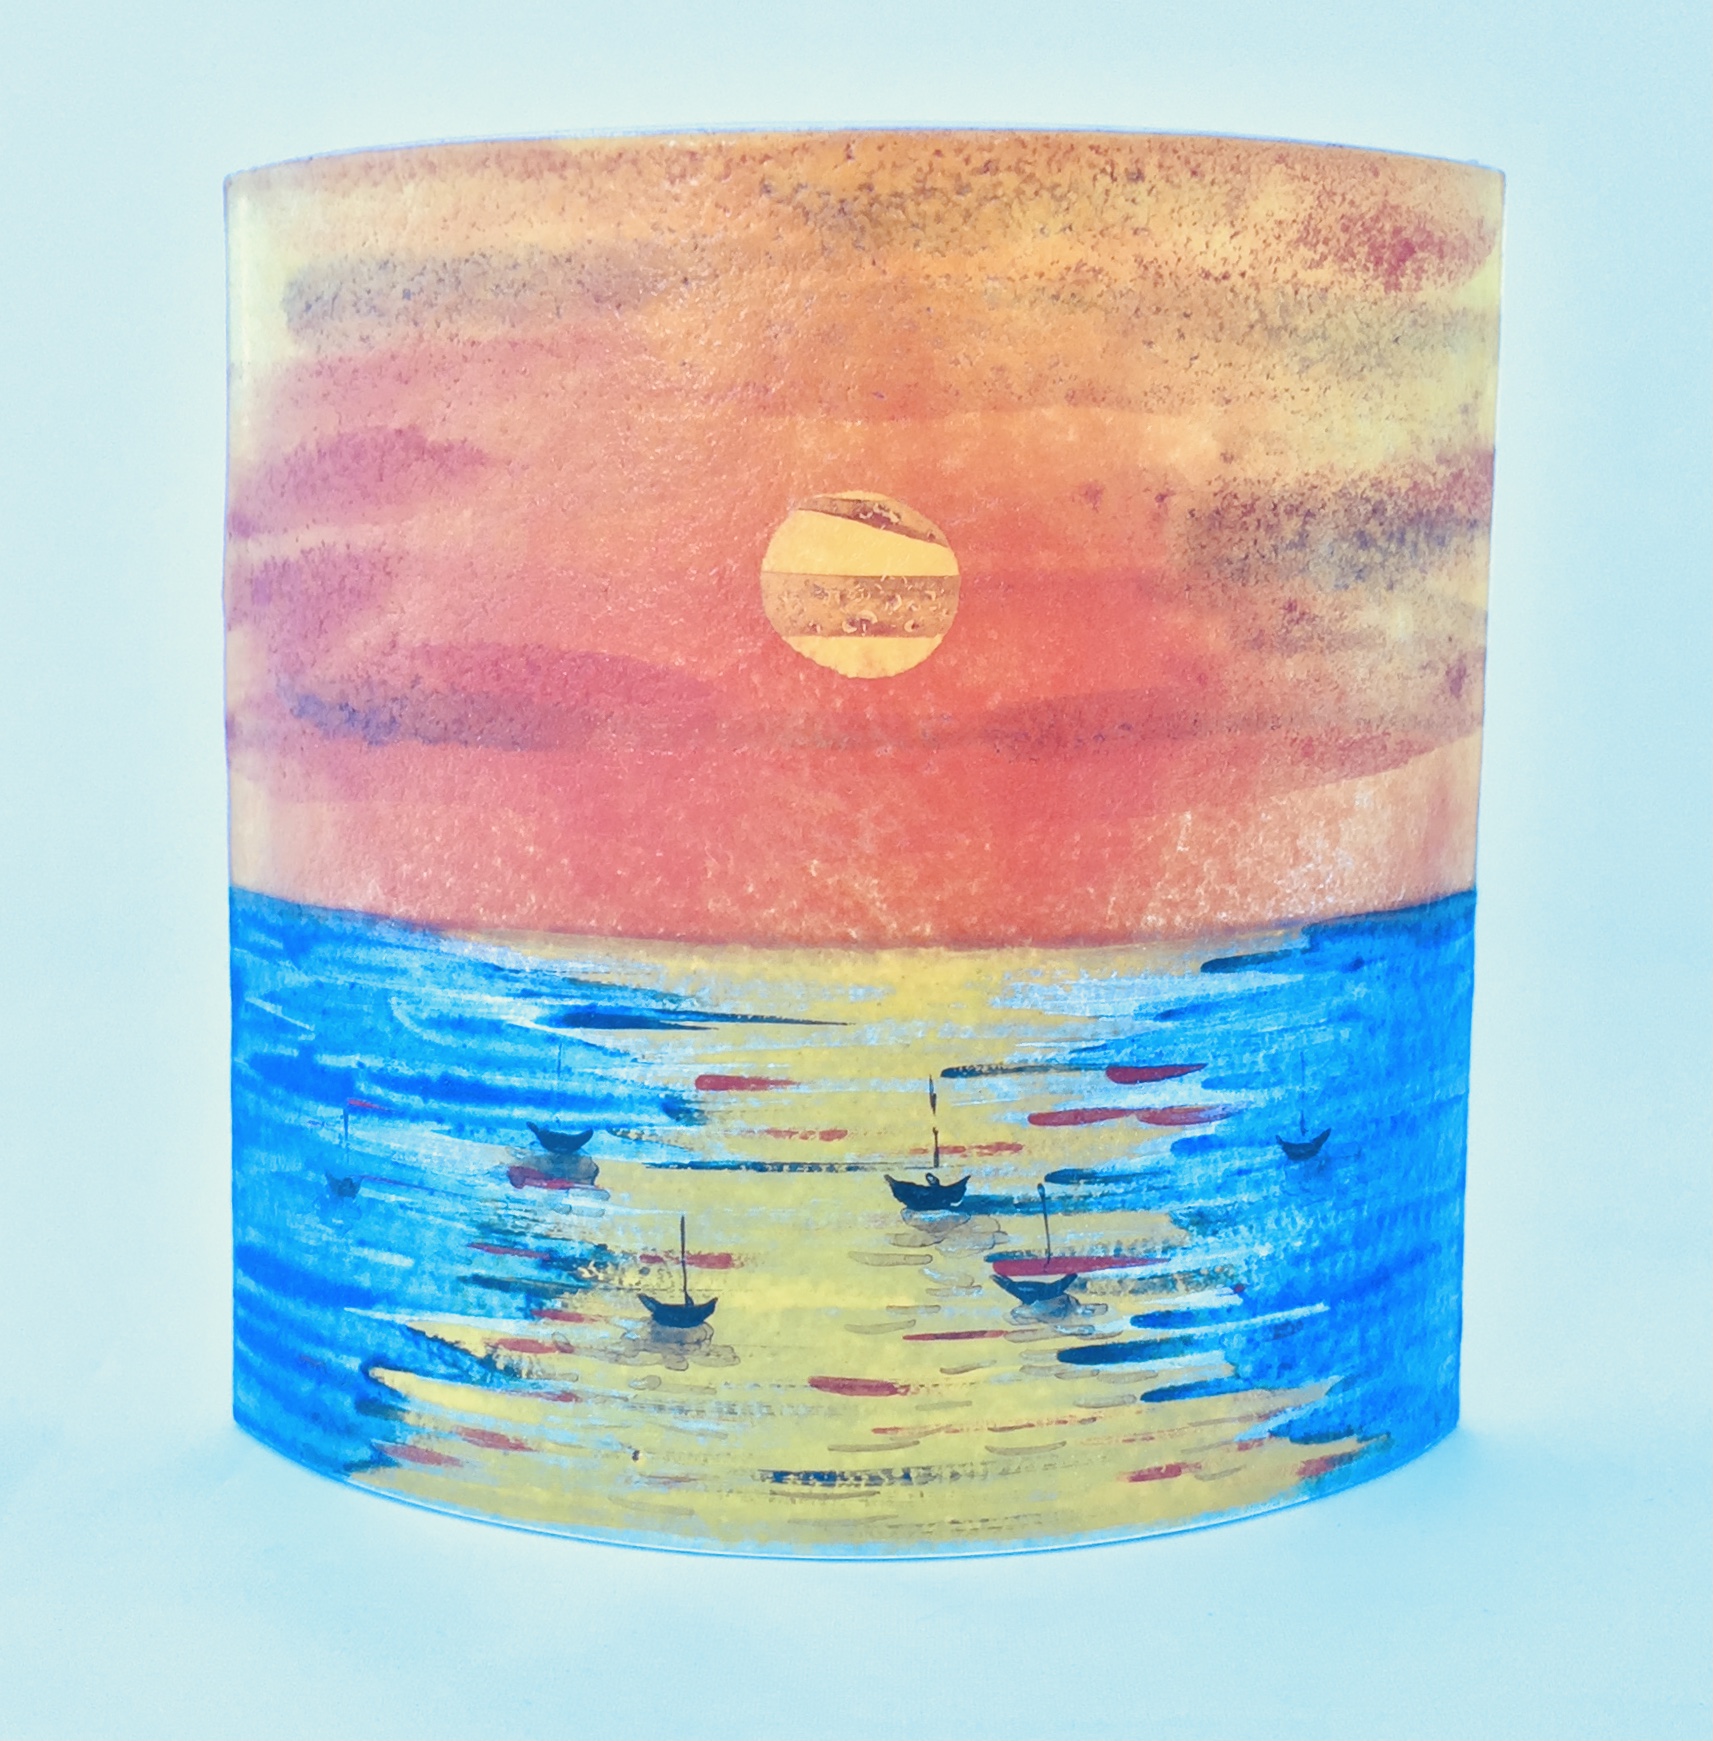 Short free-standing glass panel featuring sunset seascape, boat silhouettes